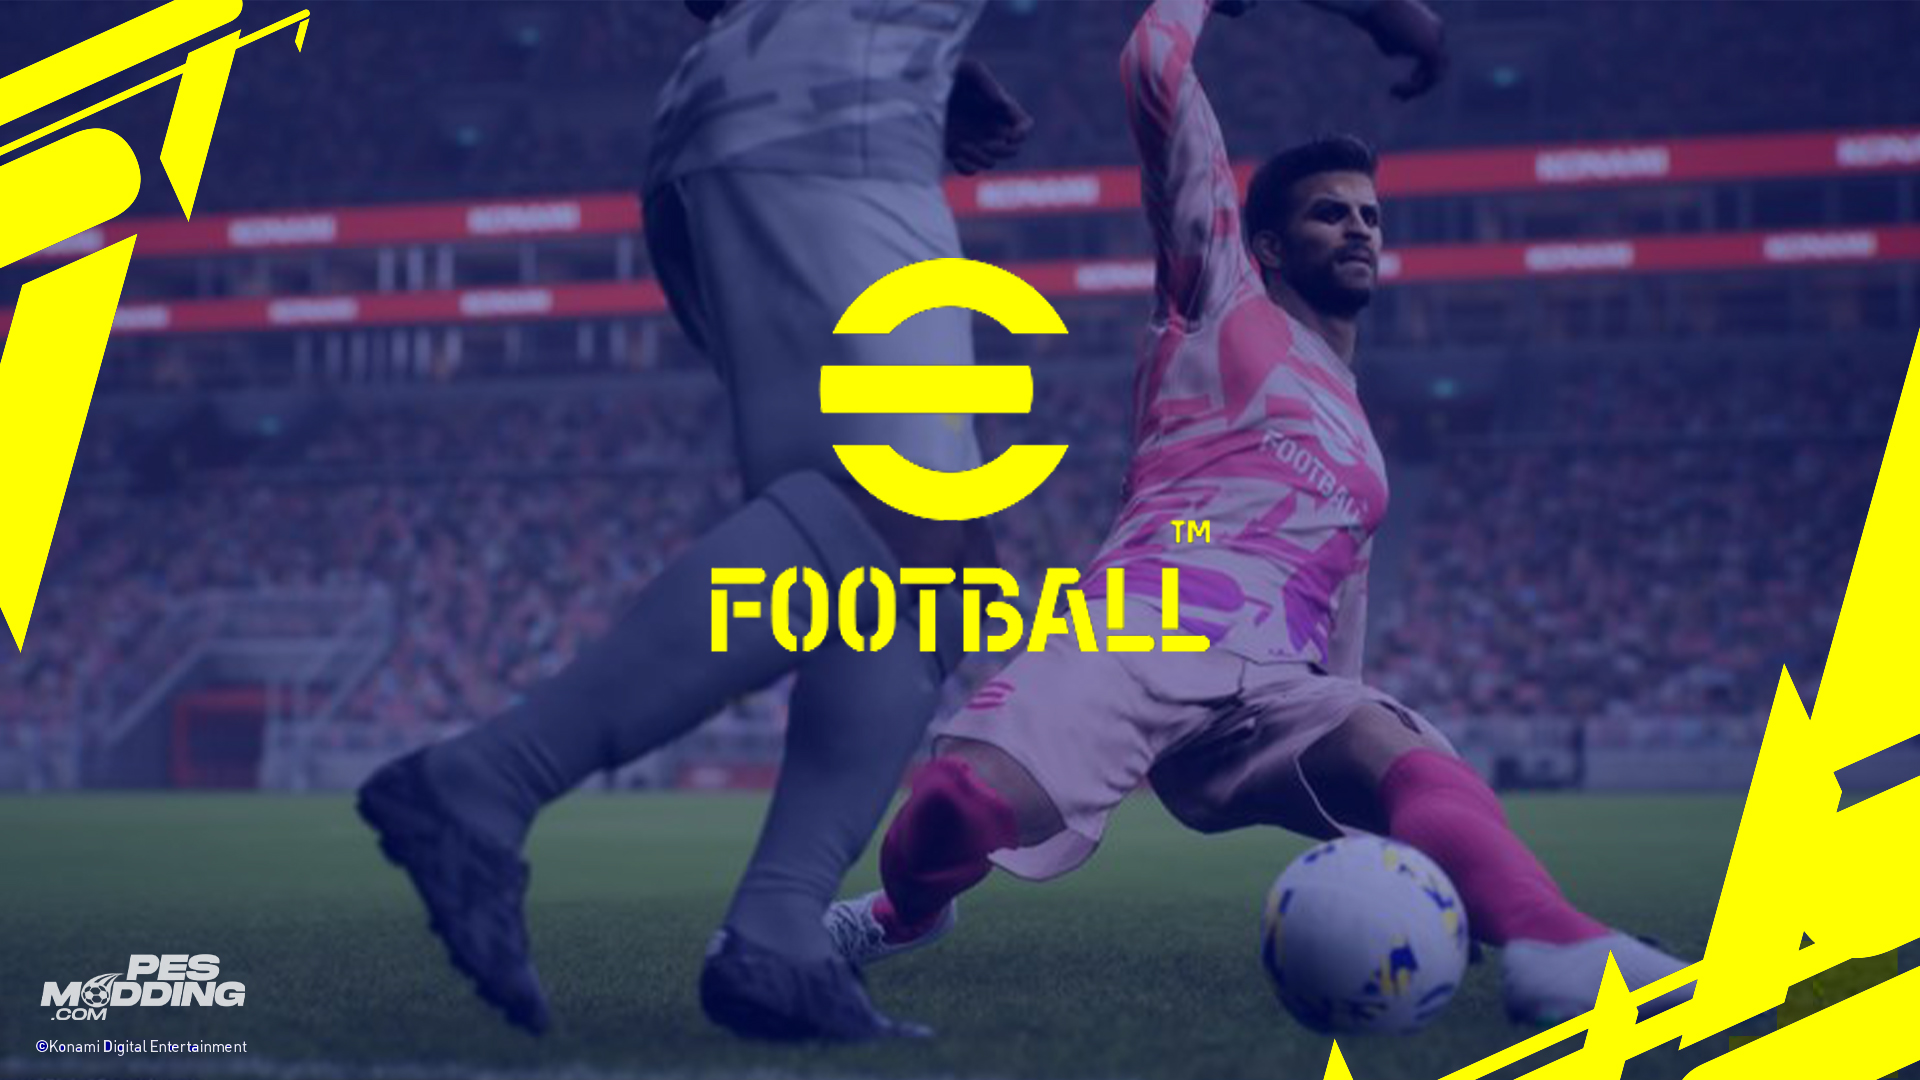 eFootball Official Name & Release Date Confirmed